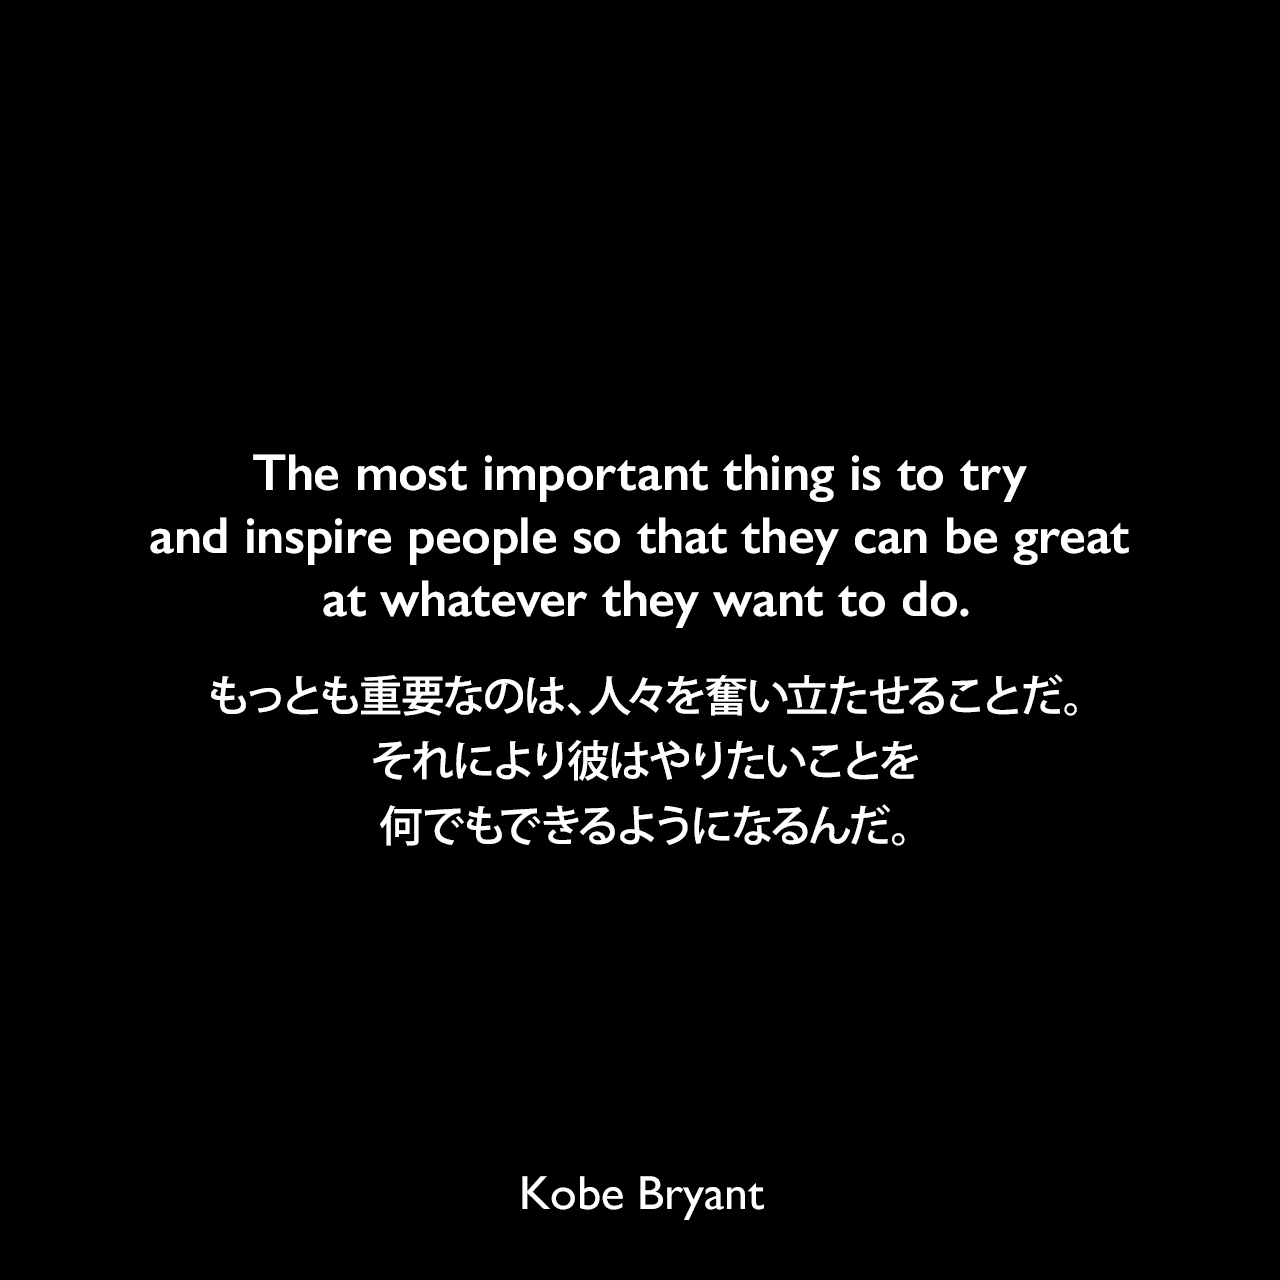 The most important thing is to try and inspire people so that they can be great at whatever they want to do.もっとも重要なのは、人々を奮い立たせることだ。それにより彼はやりたいことを何でもできるようになるんだ。Kobe Bryant